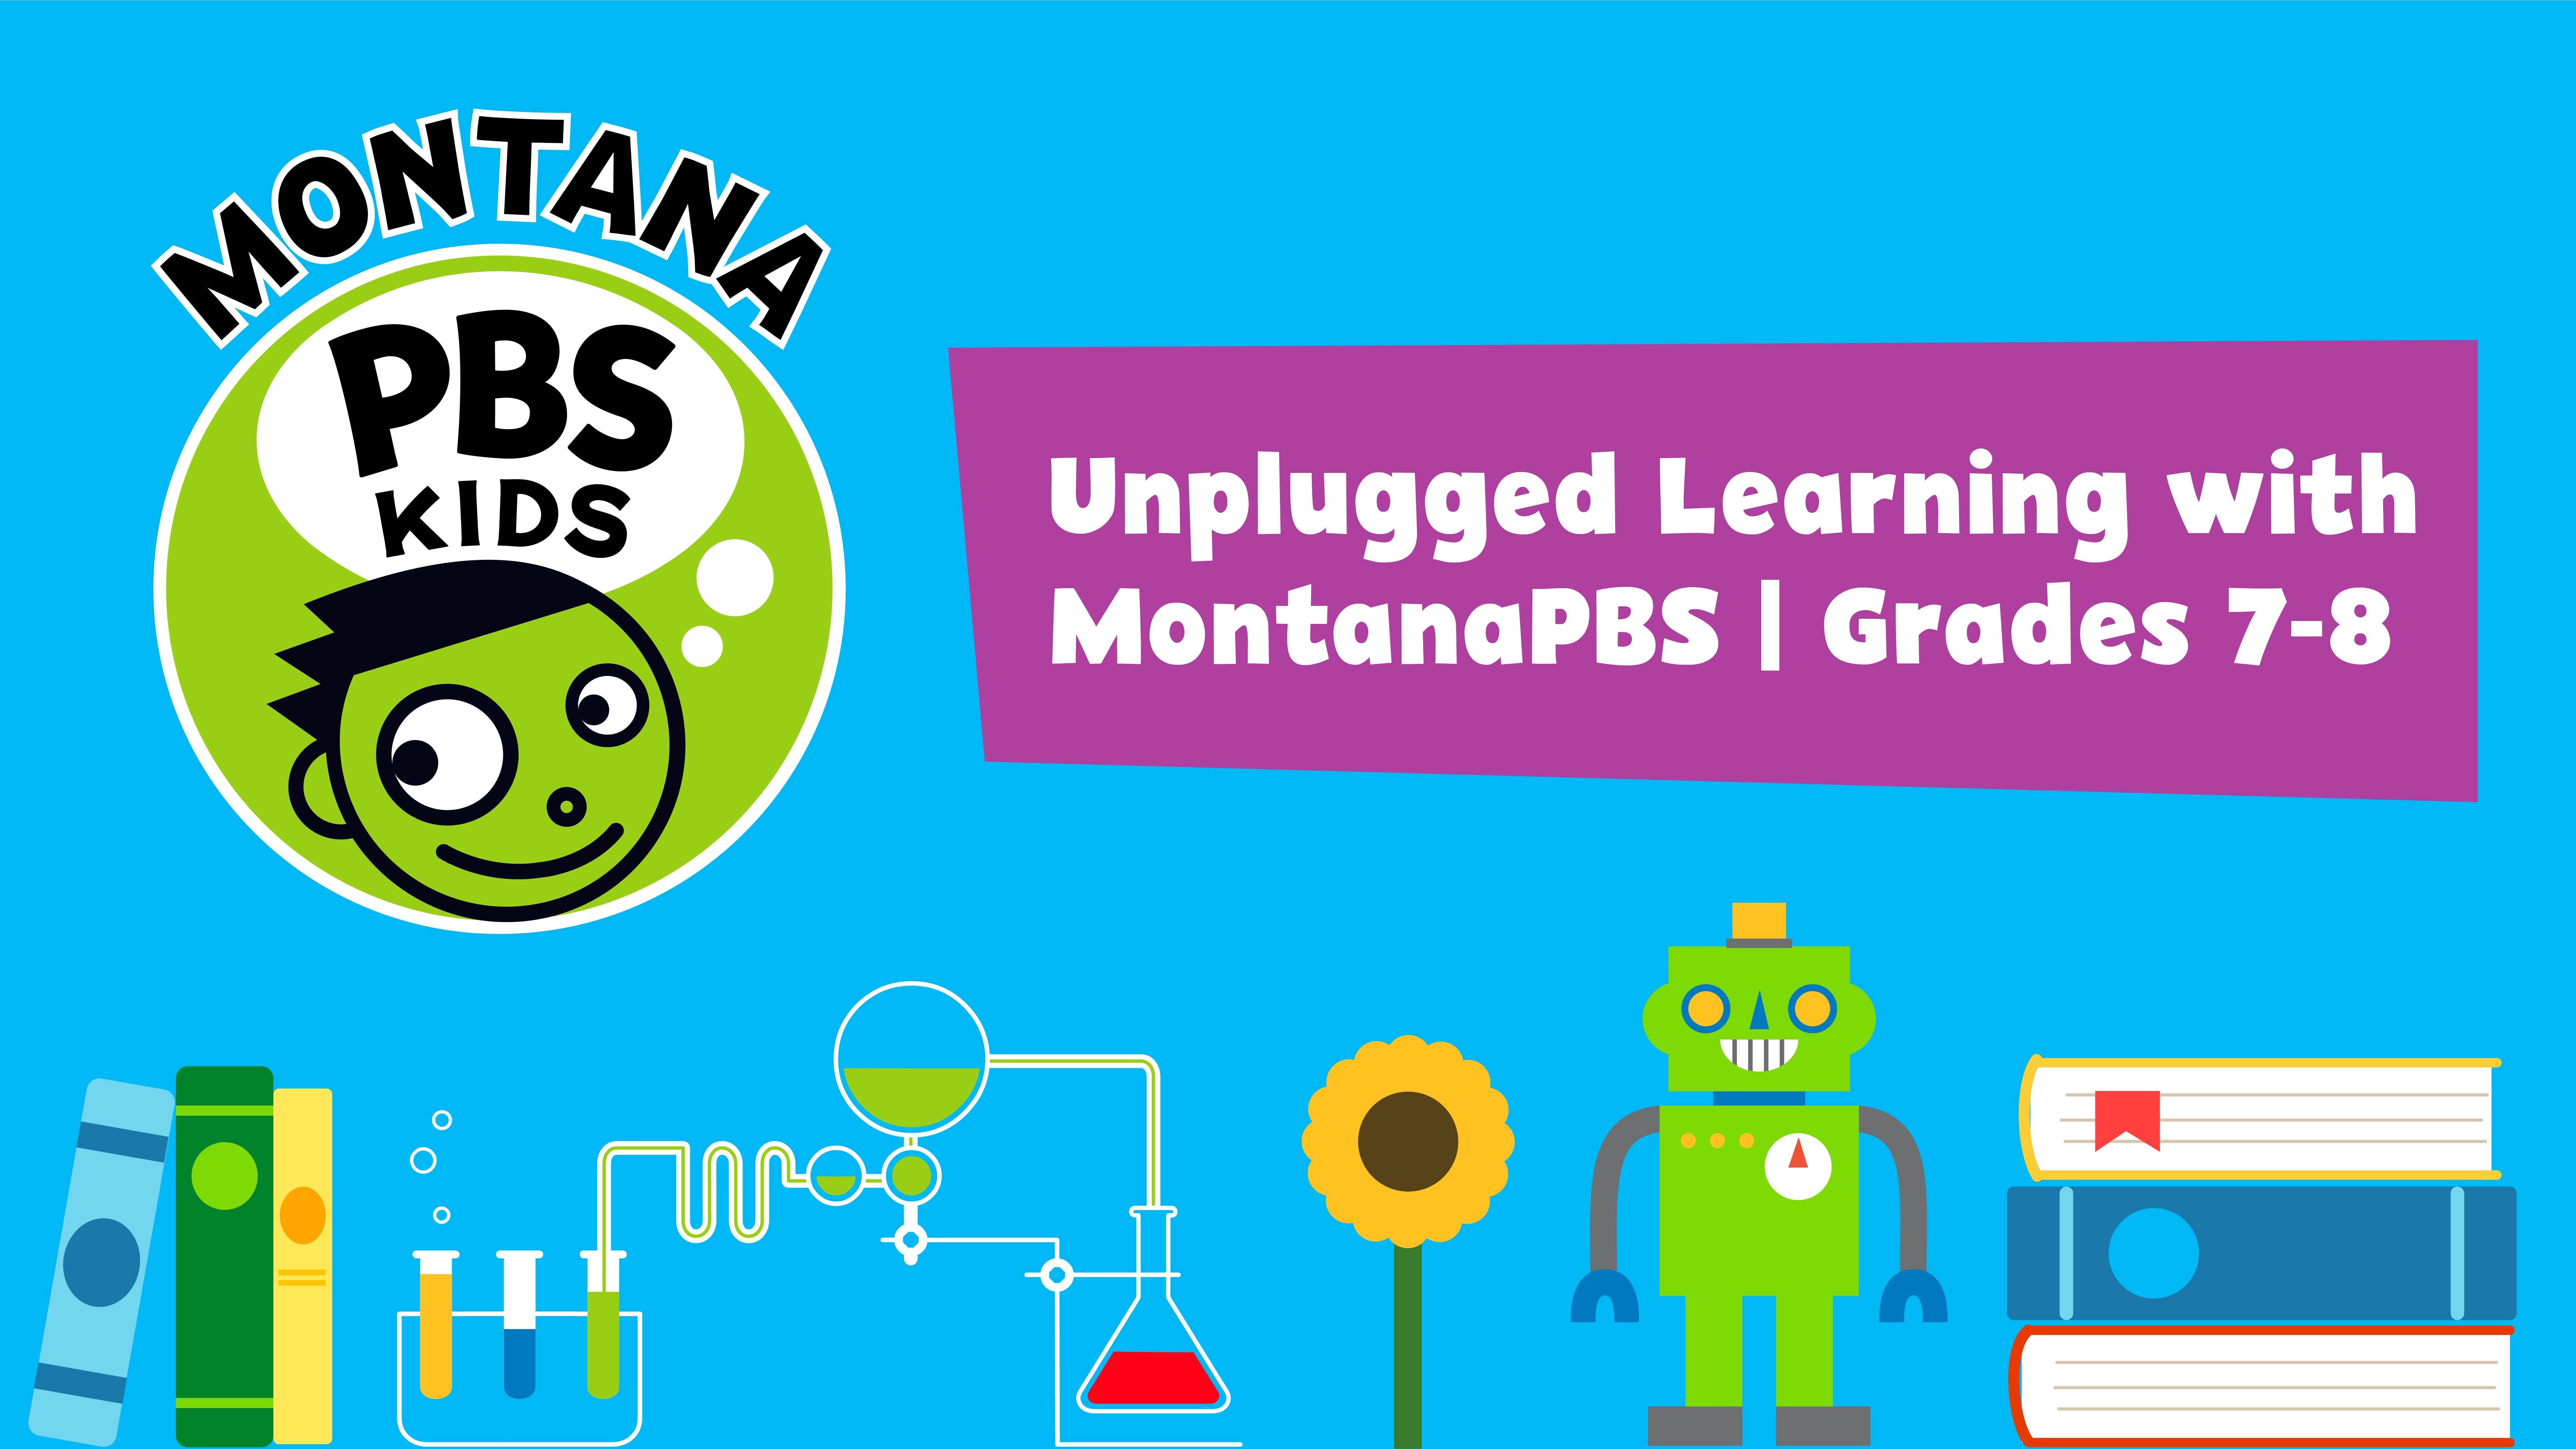 Unplugged Learning with MontanaPBS Grades 7-8